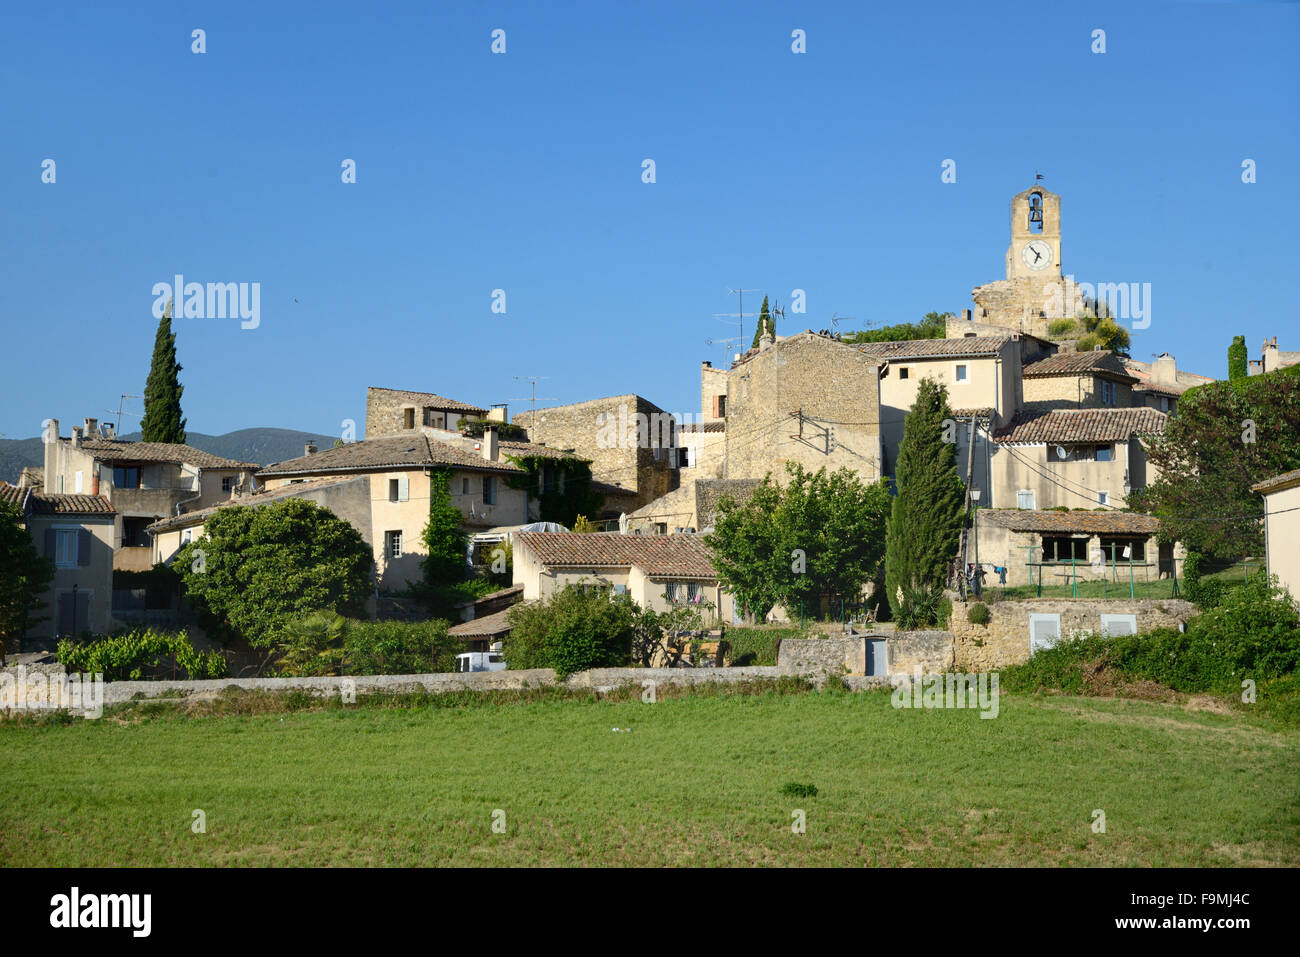 View of the Village of Lourmarin in the Luberon Regional Park Vaucluse Provence France Stock Photo